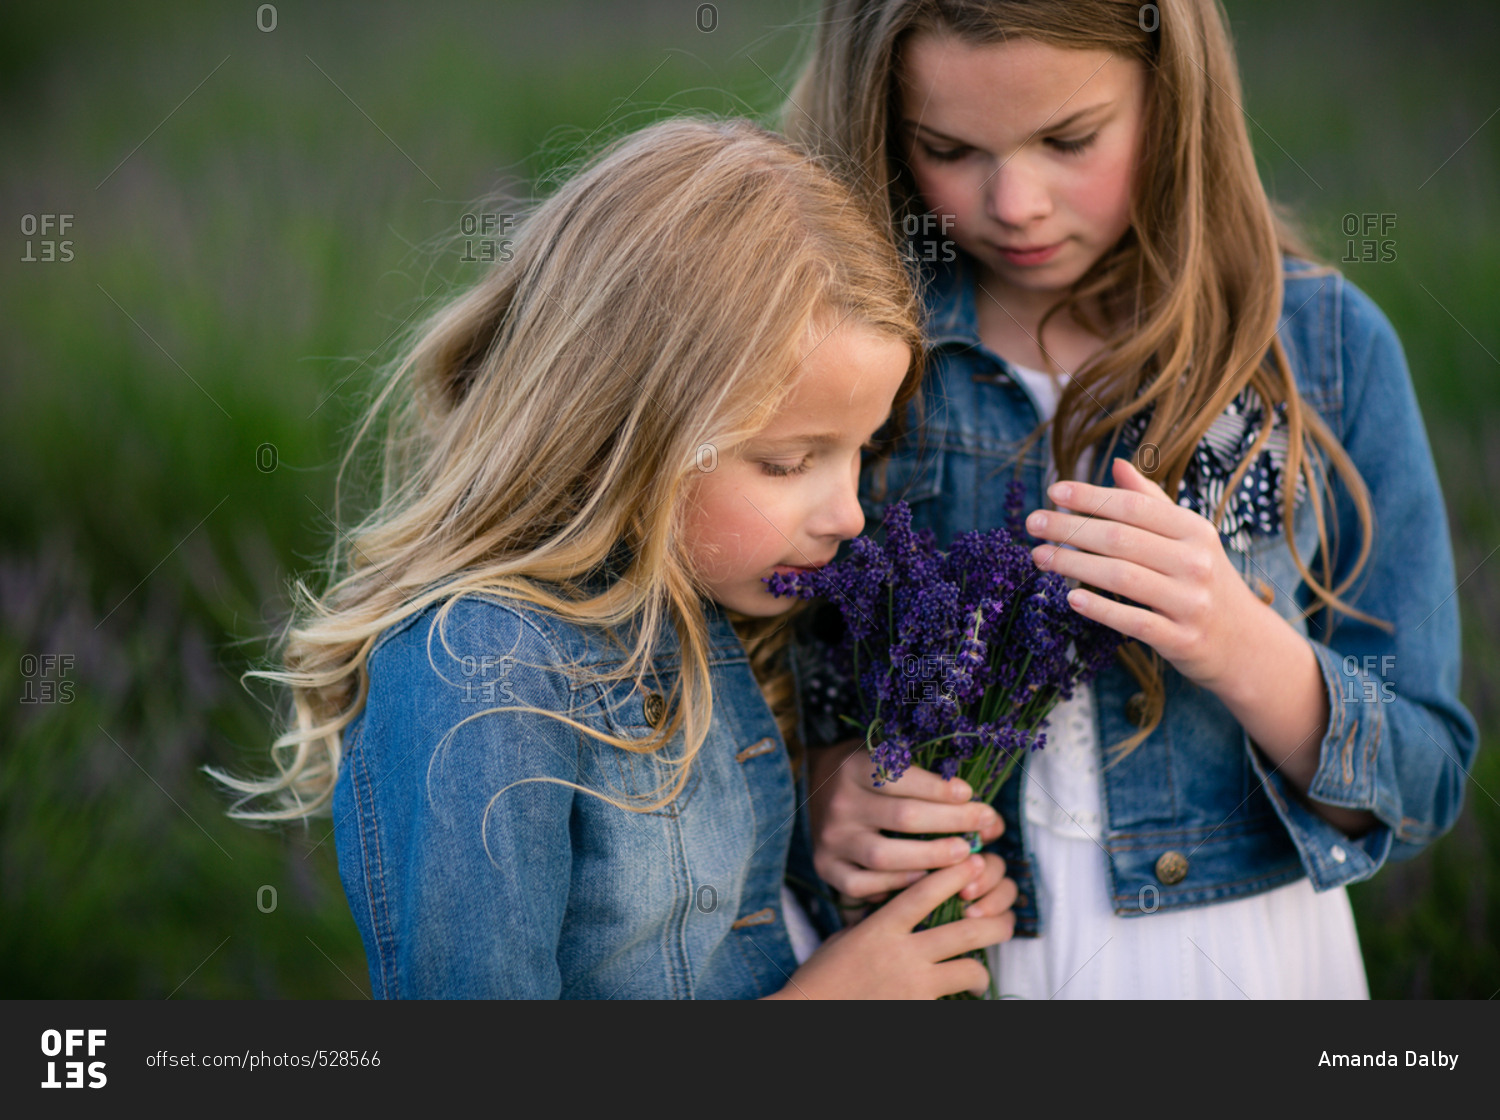 Girl smelling a bunch of freshly picked lavender flowers held by her sister